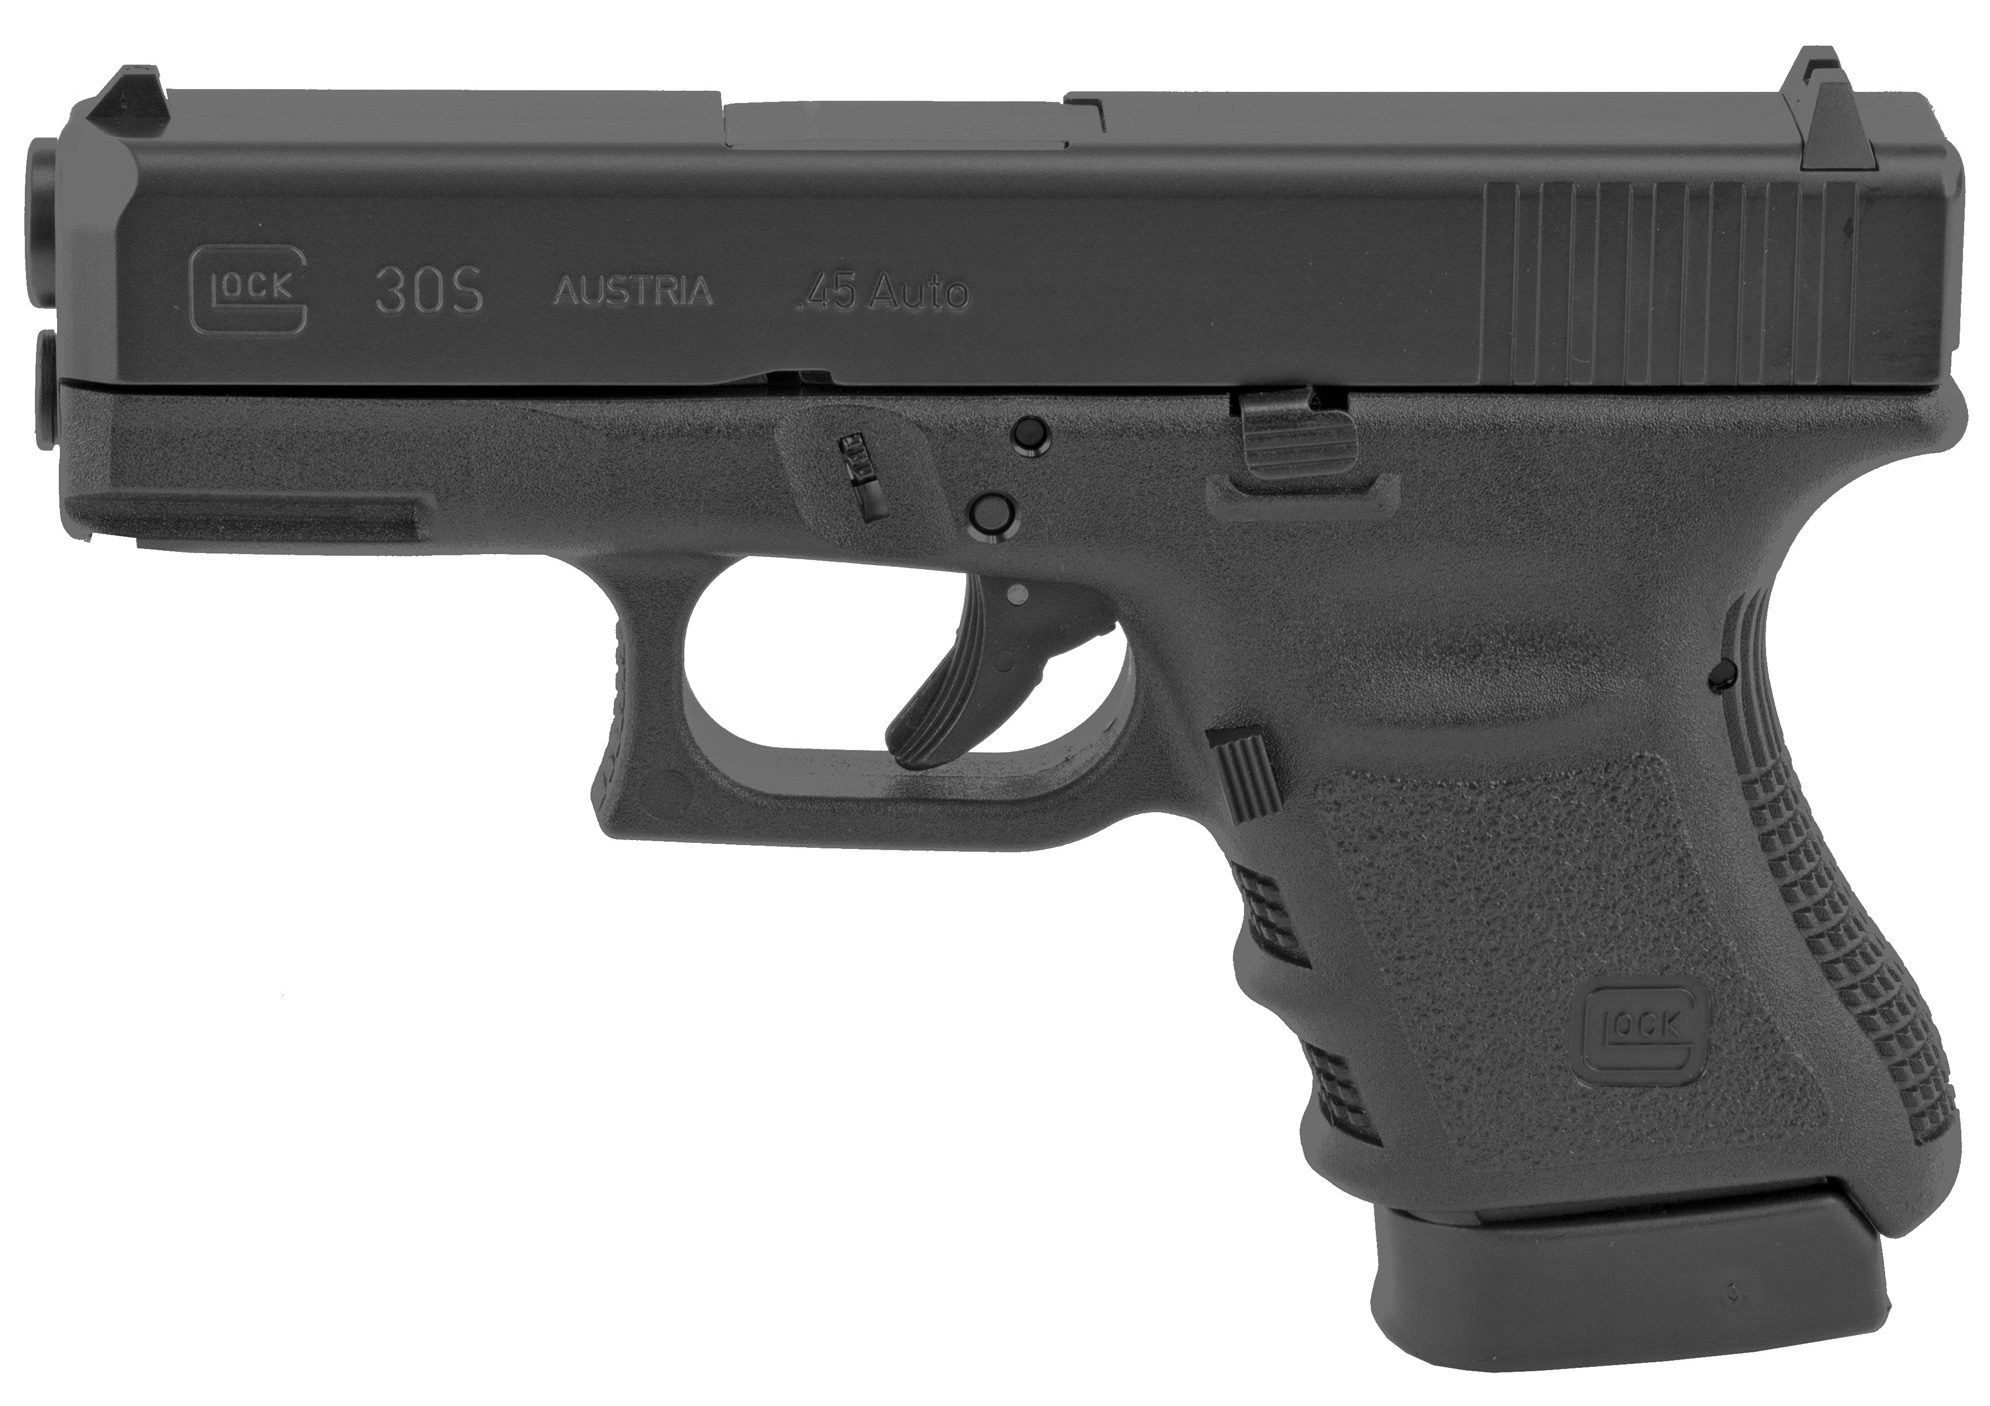 Glock 30S featured image